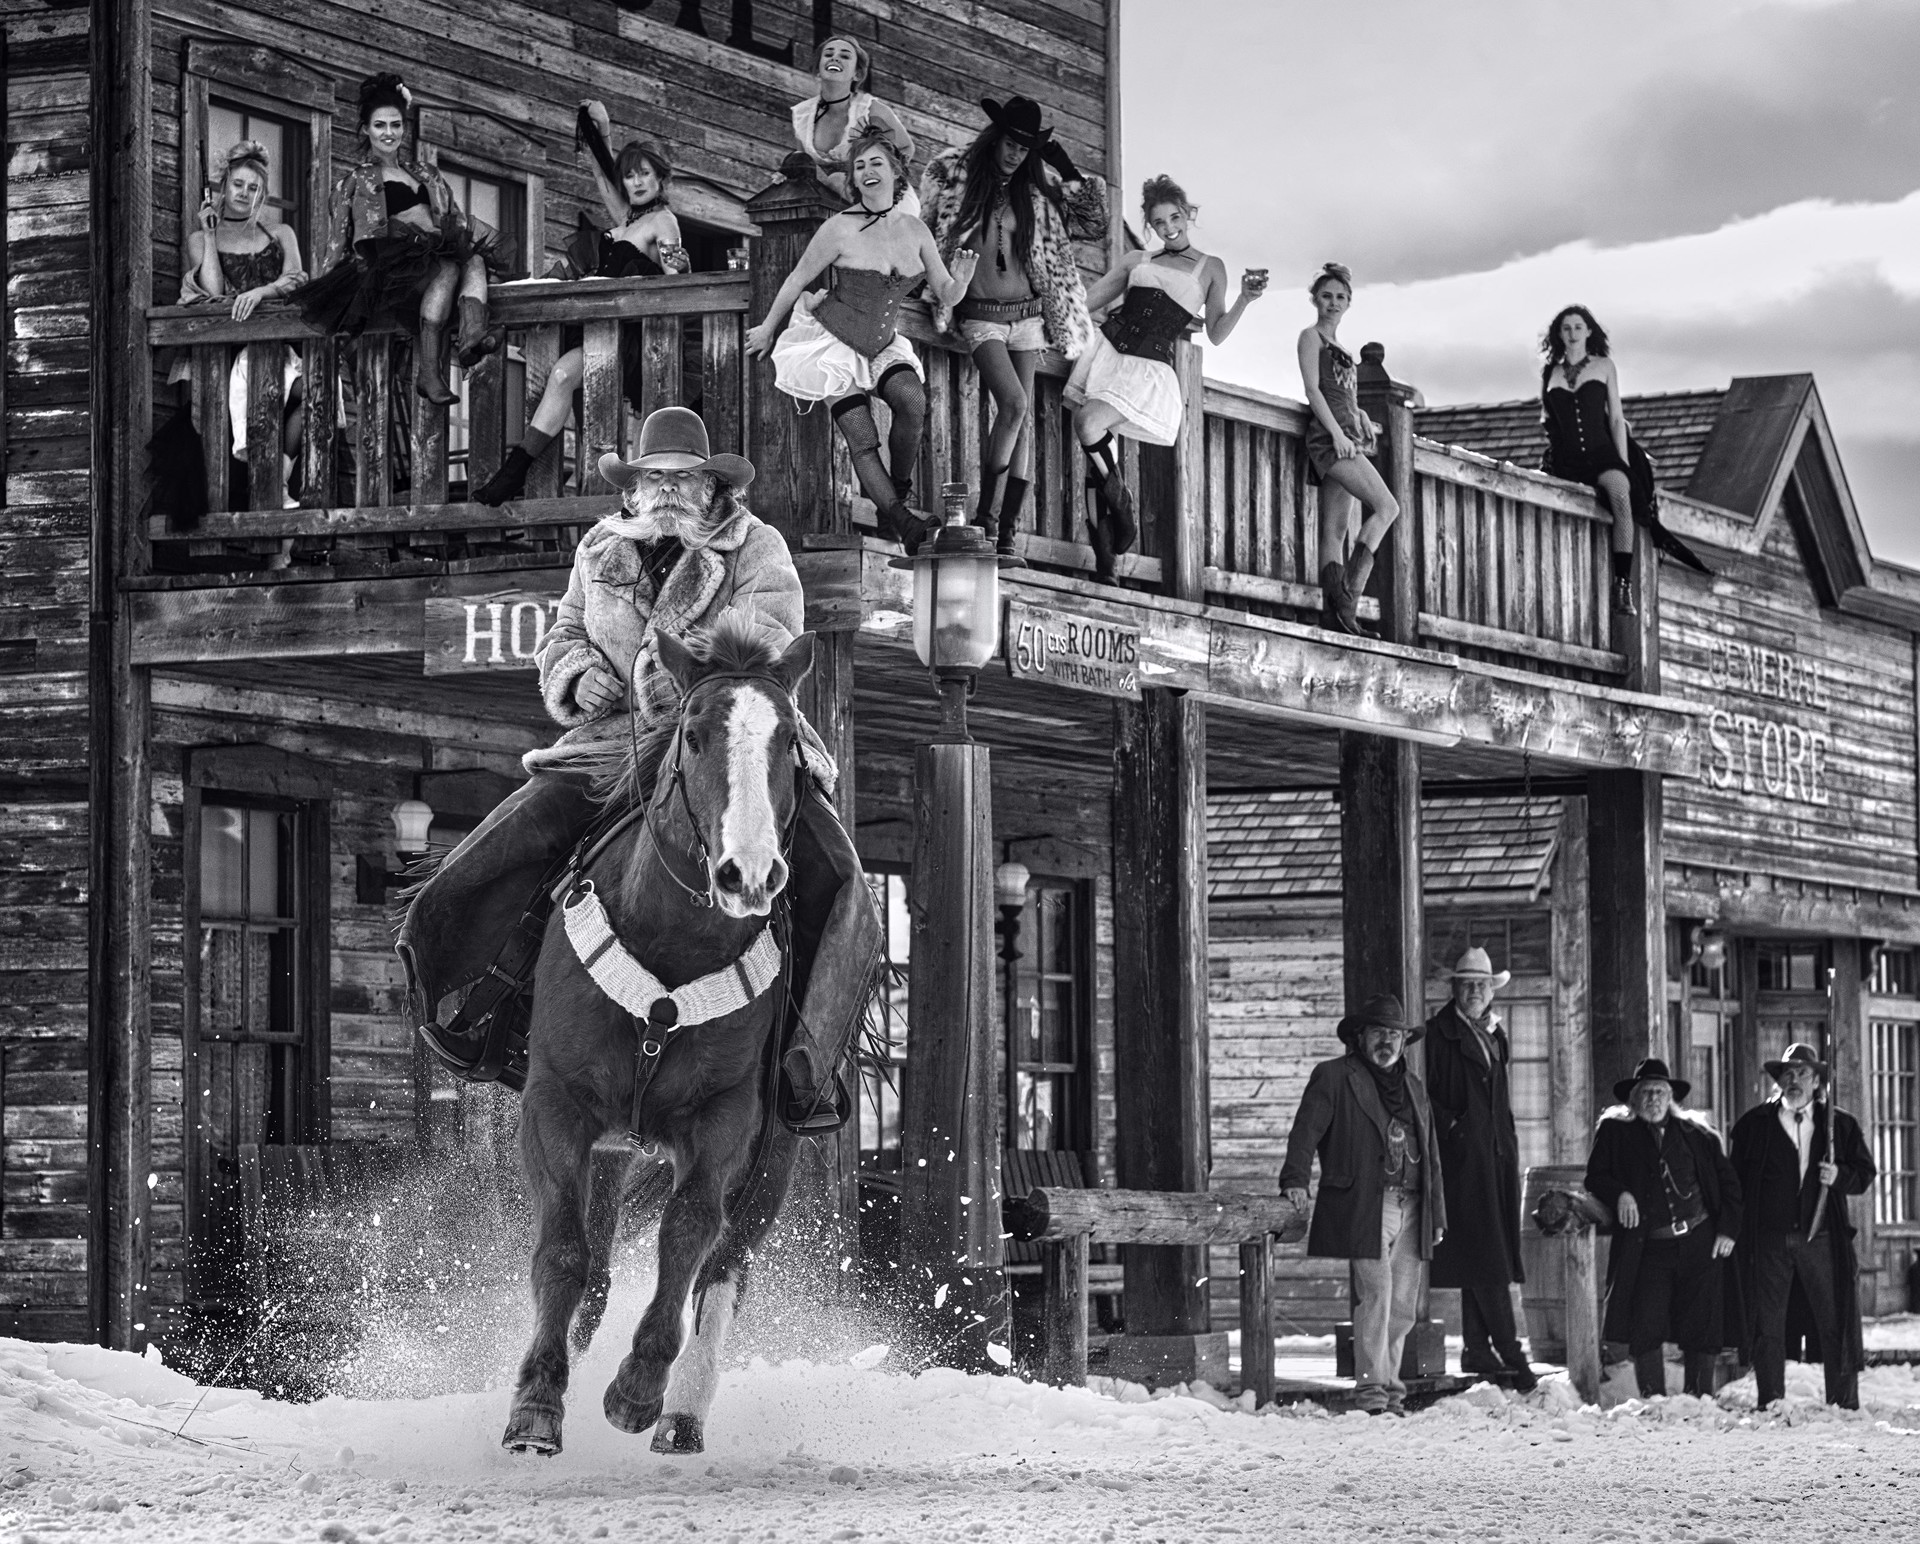 Mamas Don't Let your Children Grow up to be Cowboys by David Yarrow